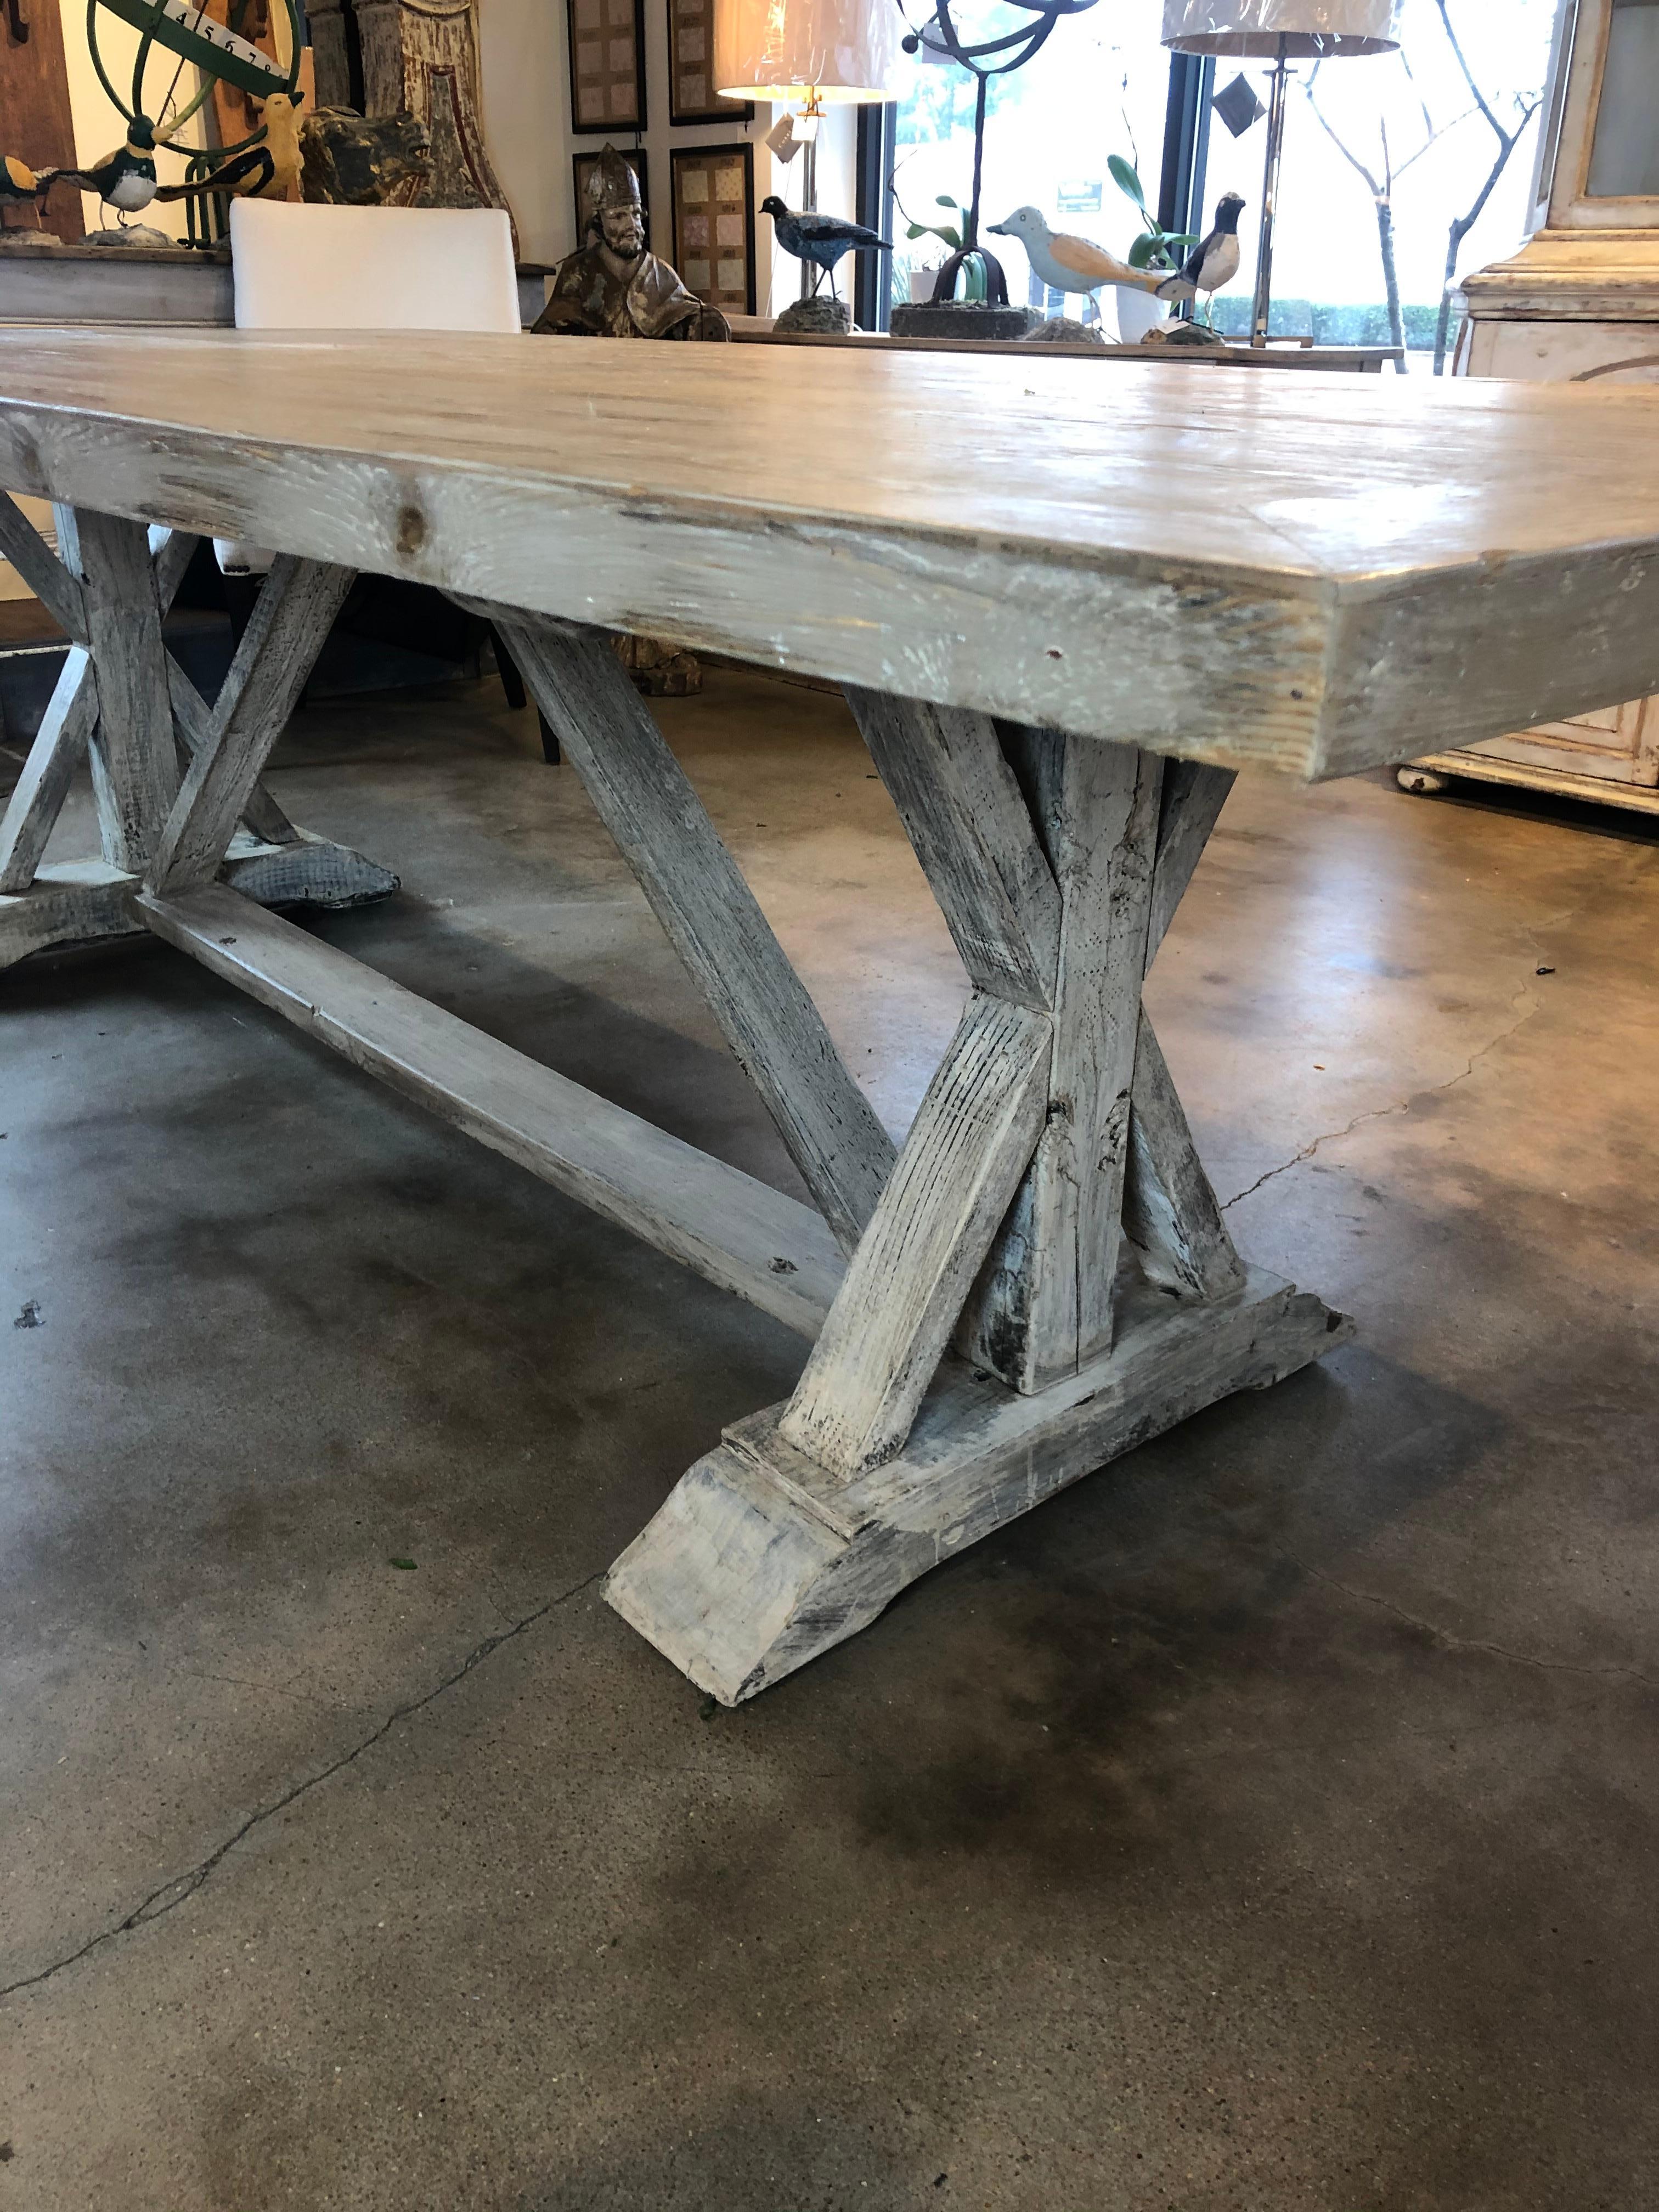 This Italian Trestle table can comfortably seat 8 people or bring in a bench and seat more in a casual setting. It hits all the style marks with its whitewashed patina. The top is a substantial size and could accommodate 2 people on the ends as